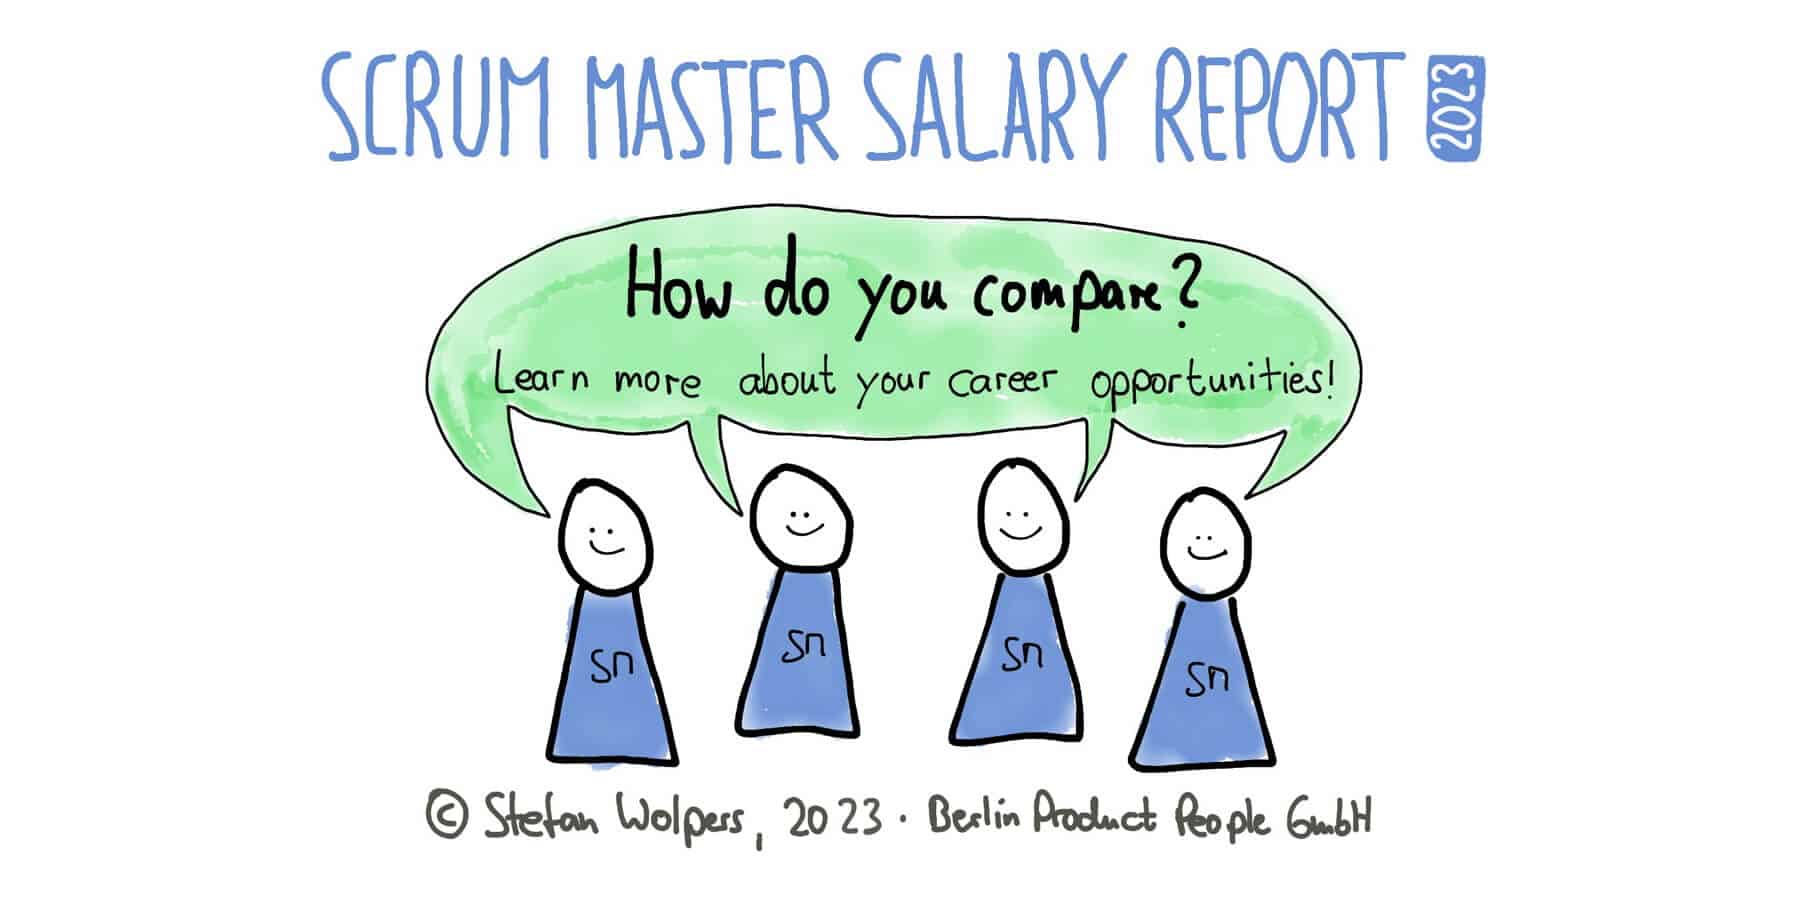 Scrum Master Salary Report 2023 — Free Download — Berlin-Product-People.com